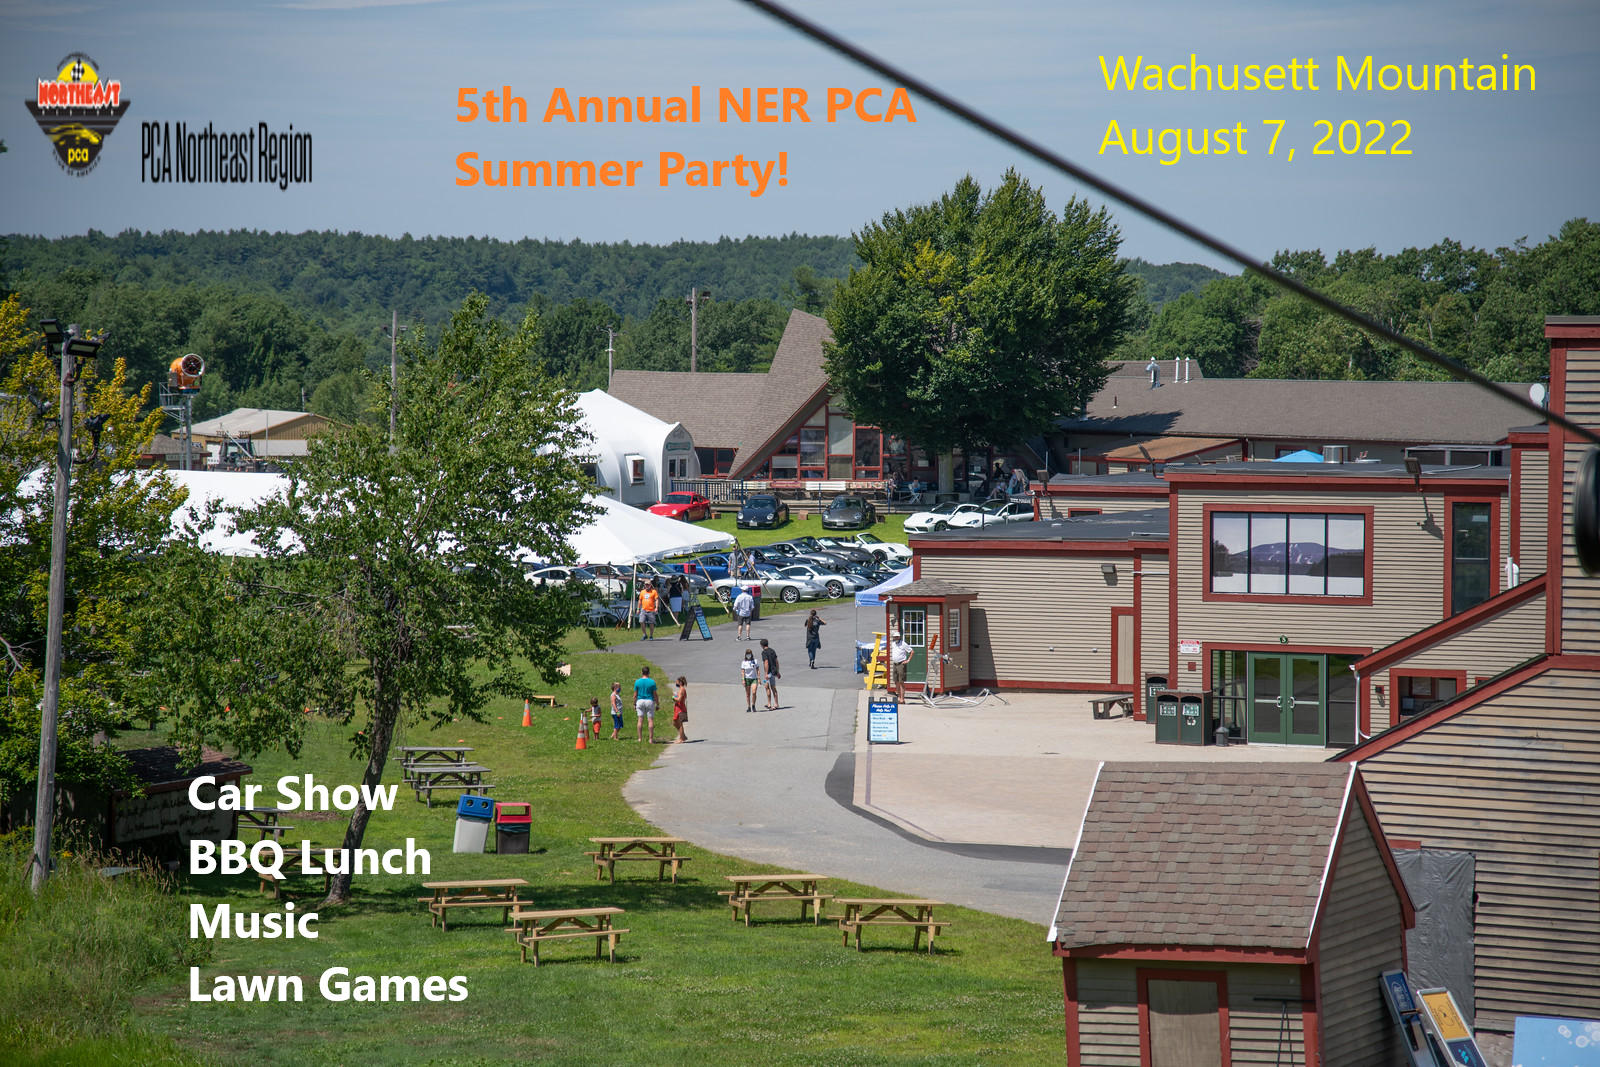 5th Annual NER PCA Summer Party